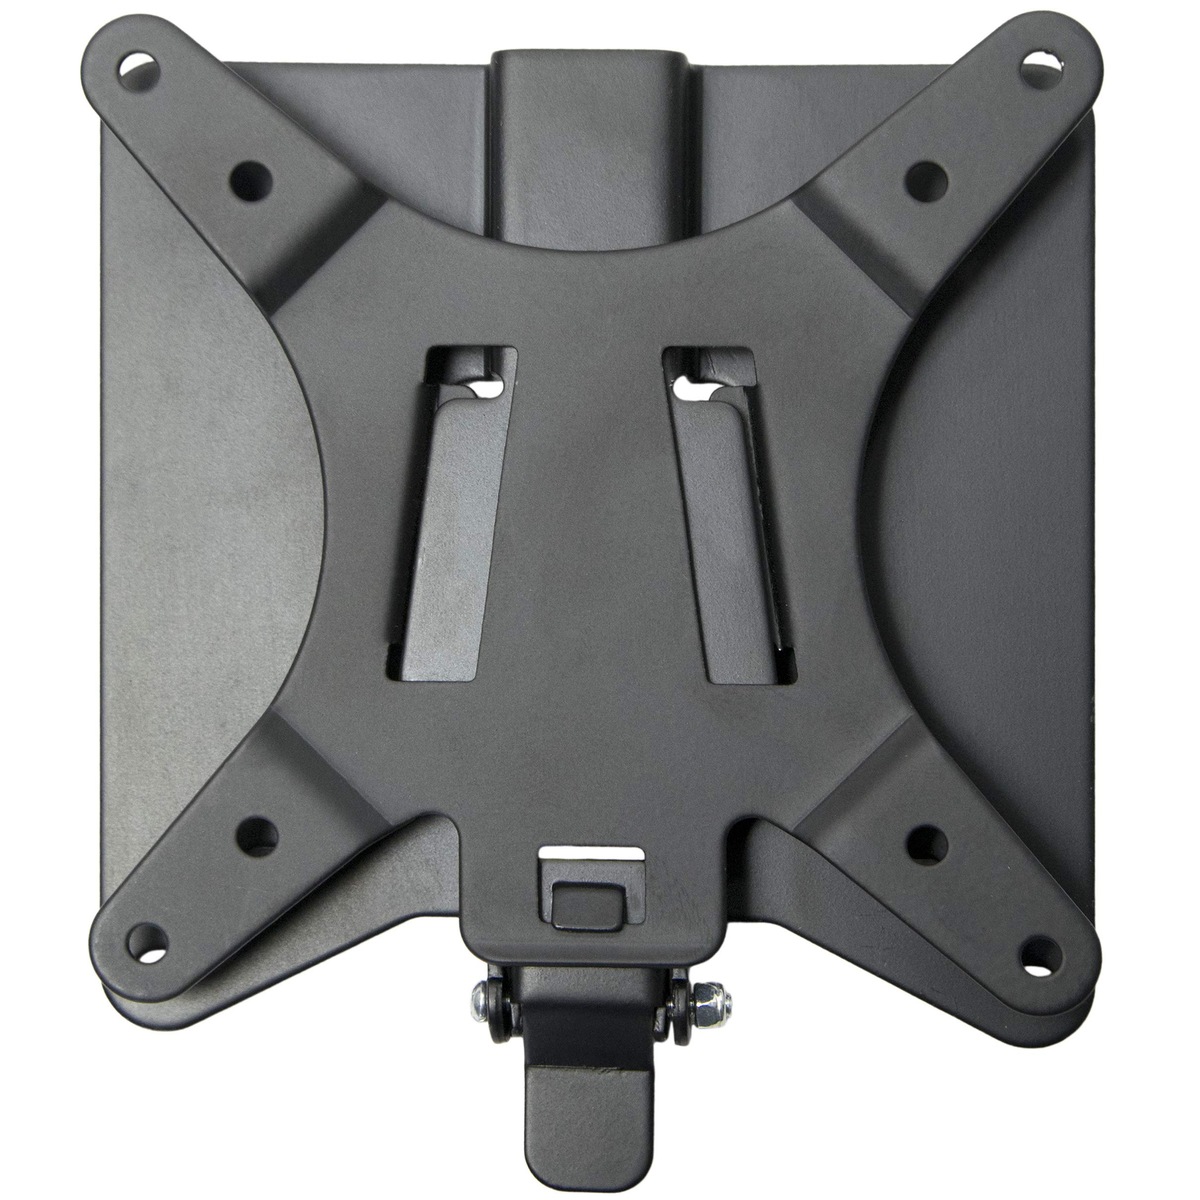 What Is A Vesa Mount Adapter